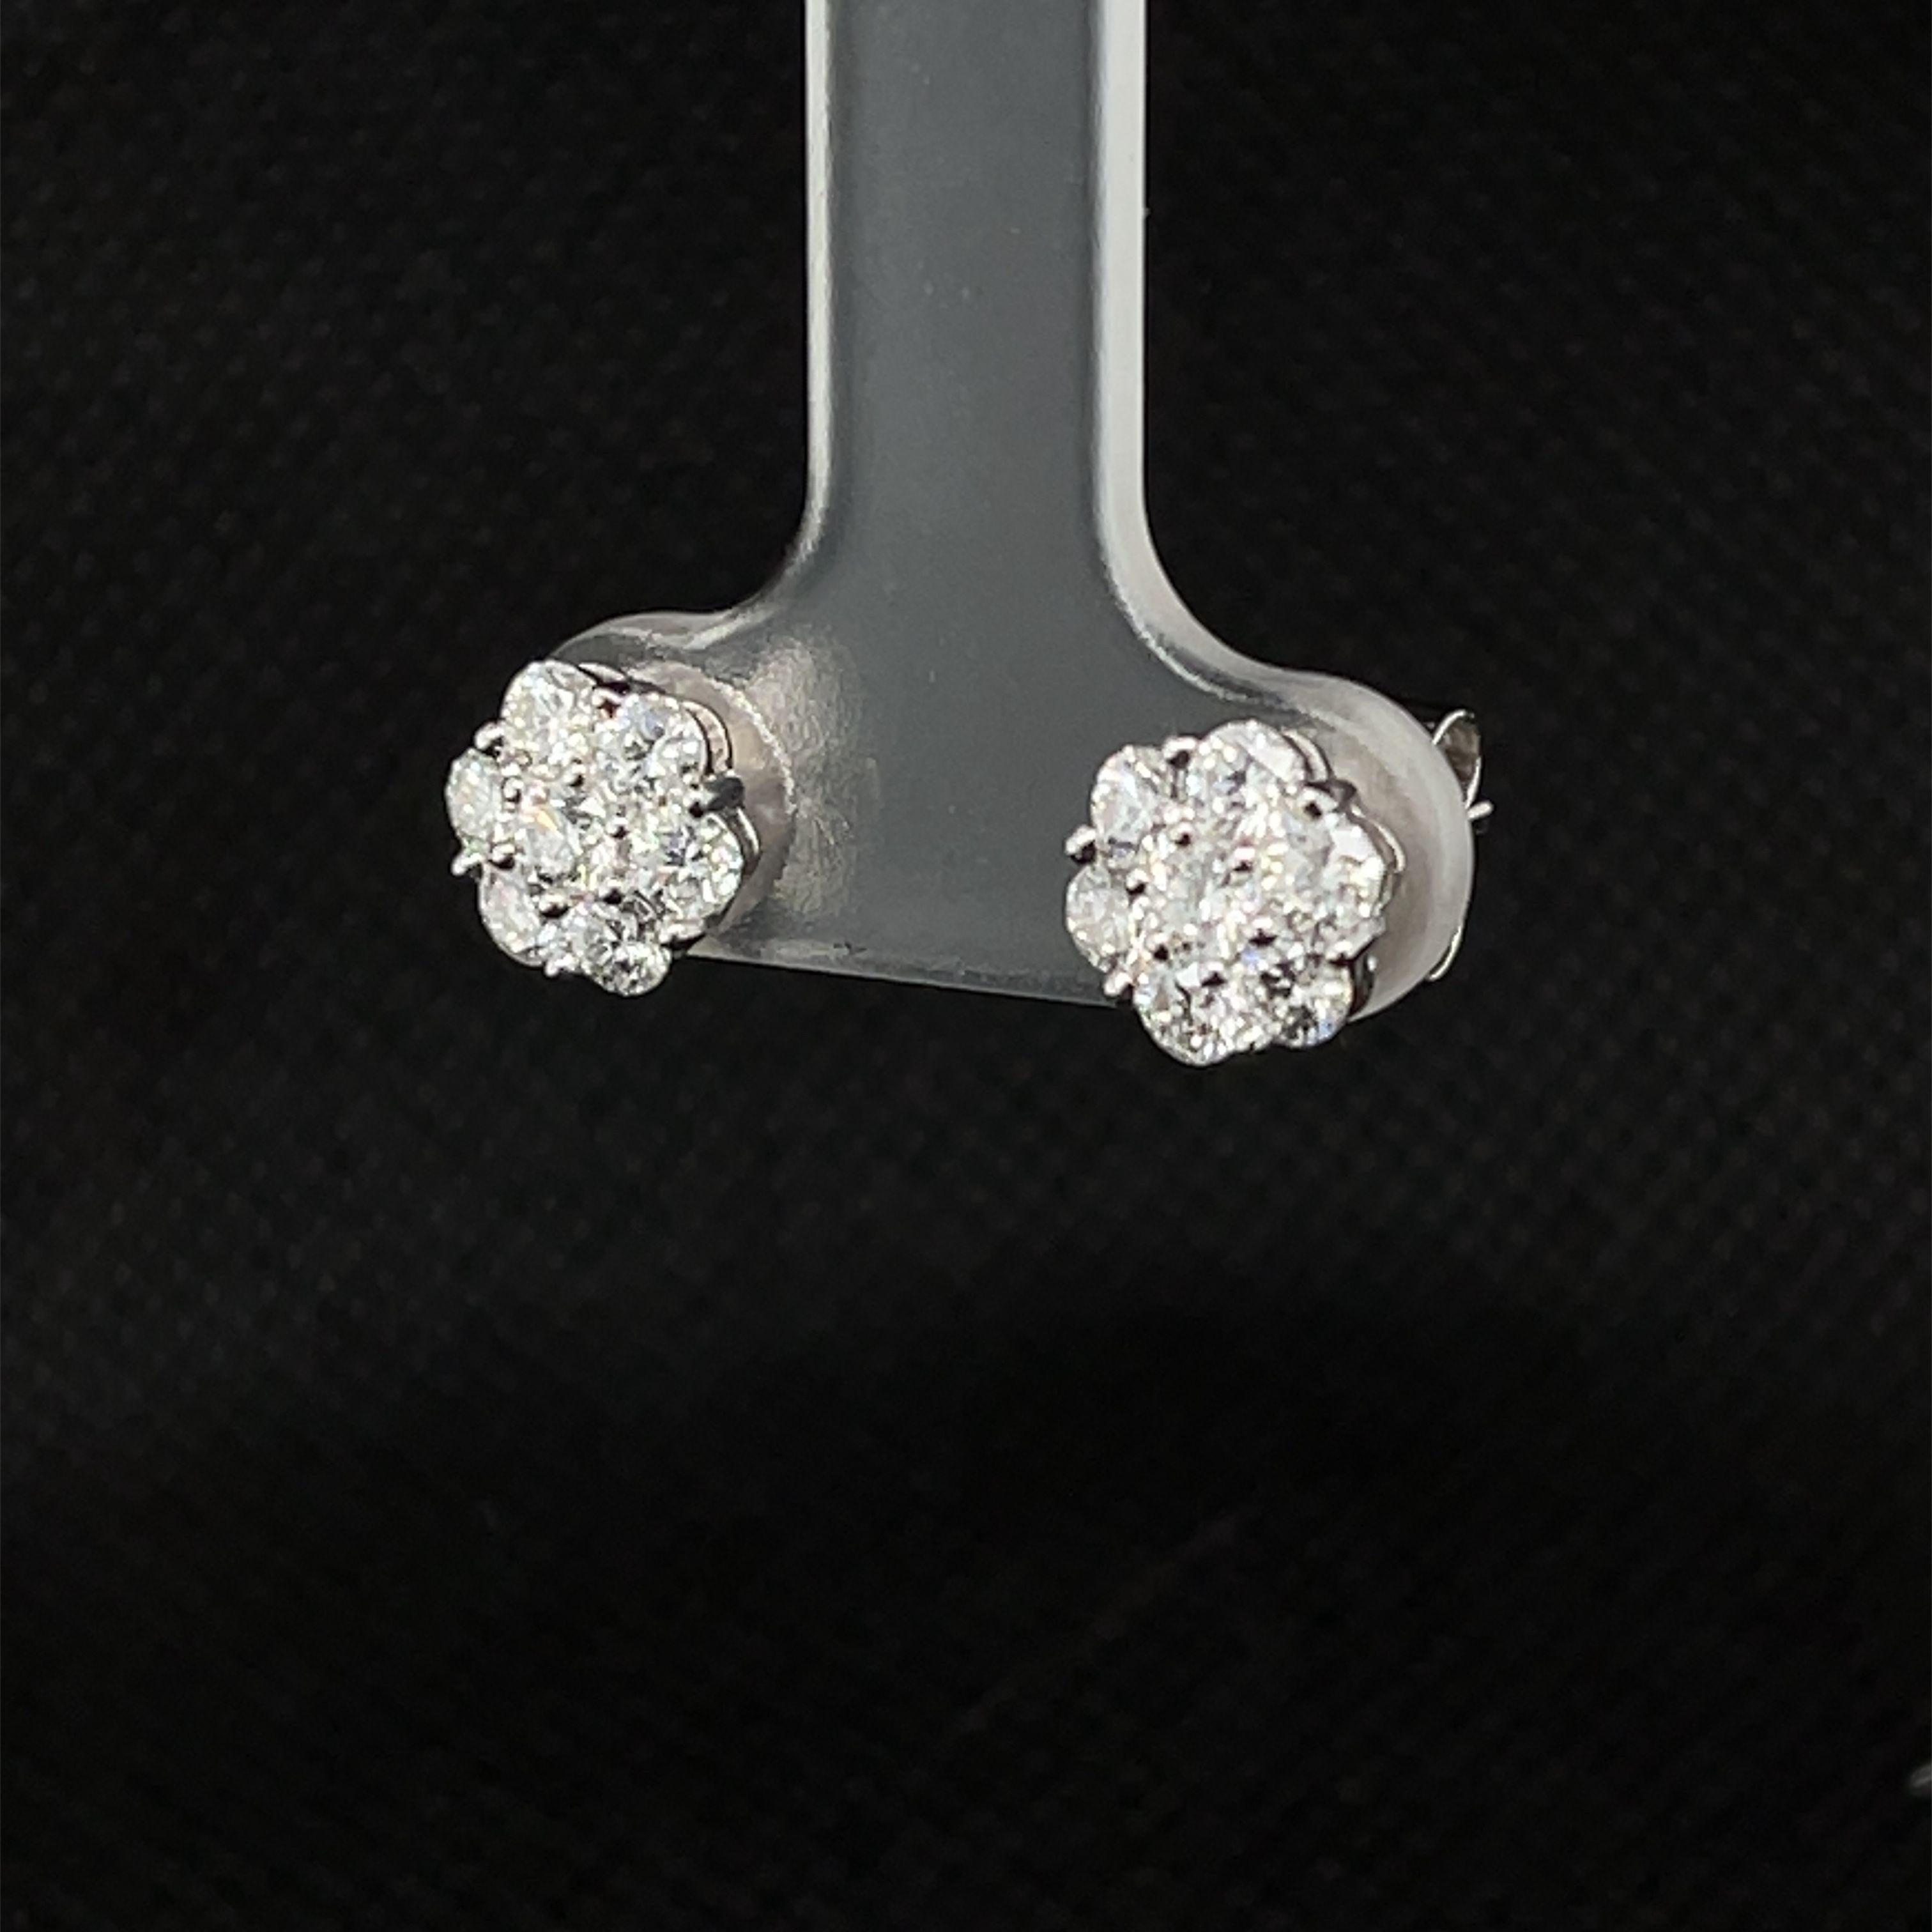 Women's or Men's Diamond Floral Cluster Stud Earrings in White Gold, 1.09 Carat Total  For Sale